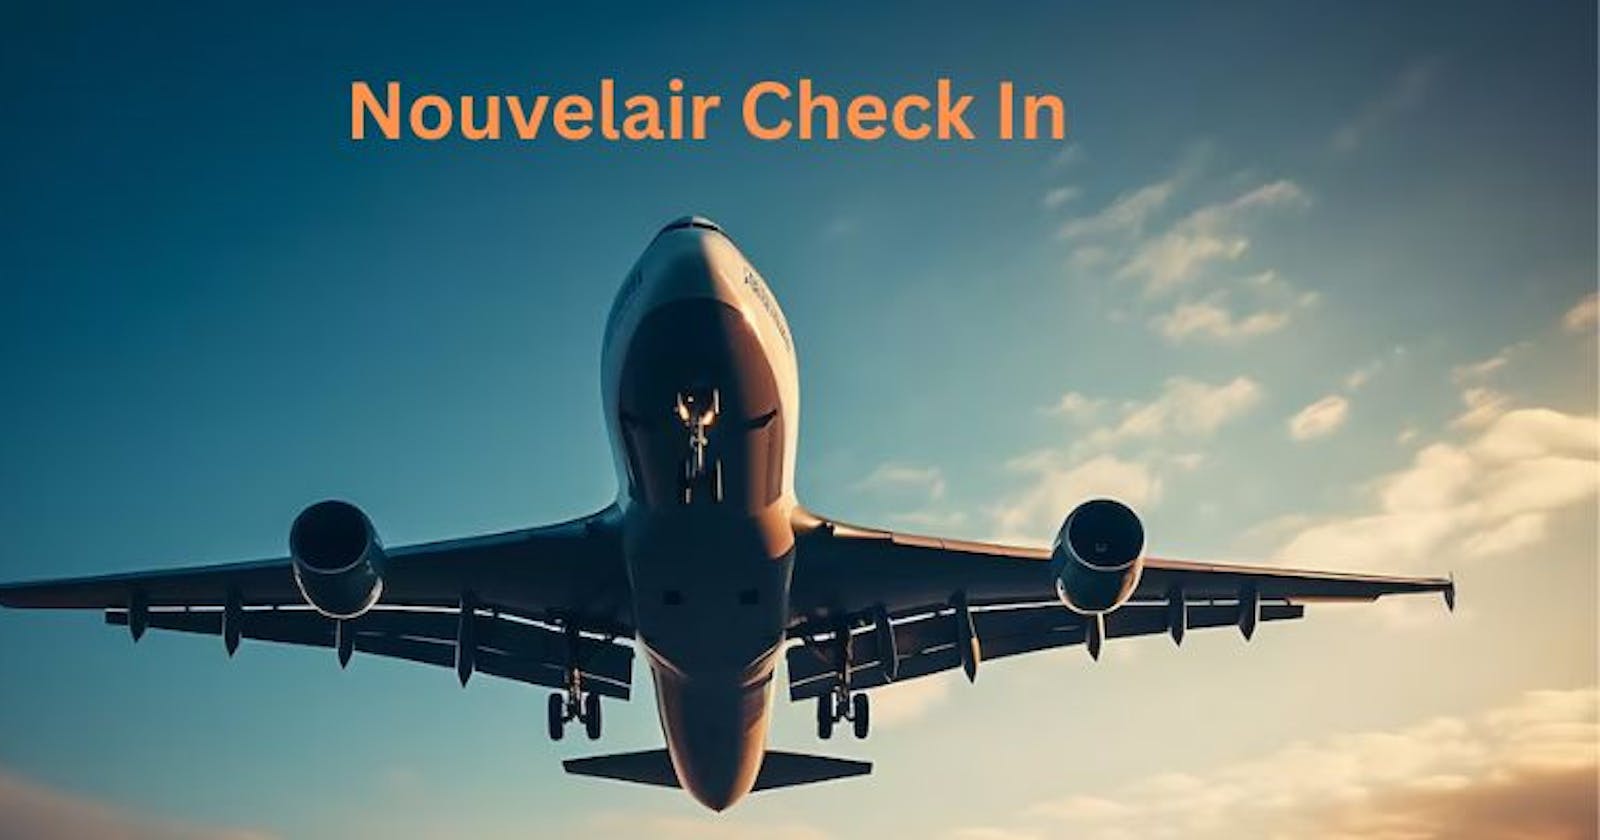 A Guide to the Nouvelair Check In